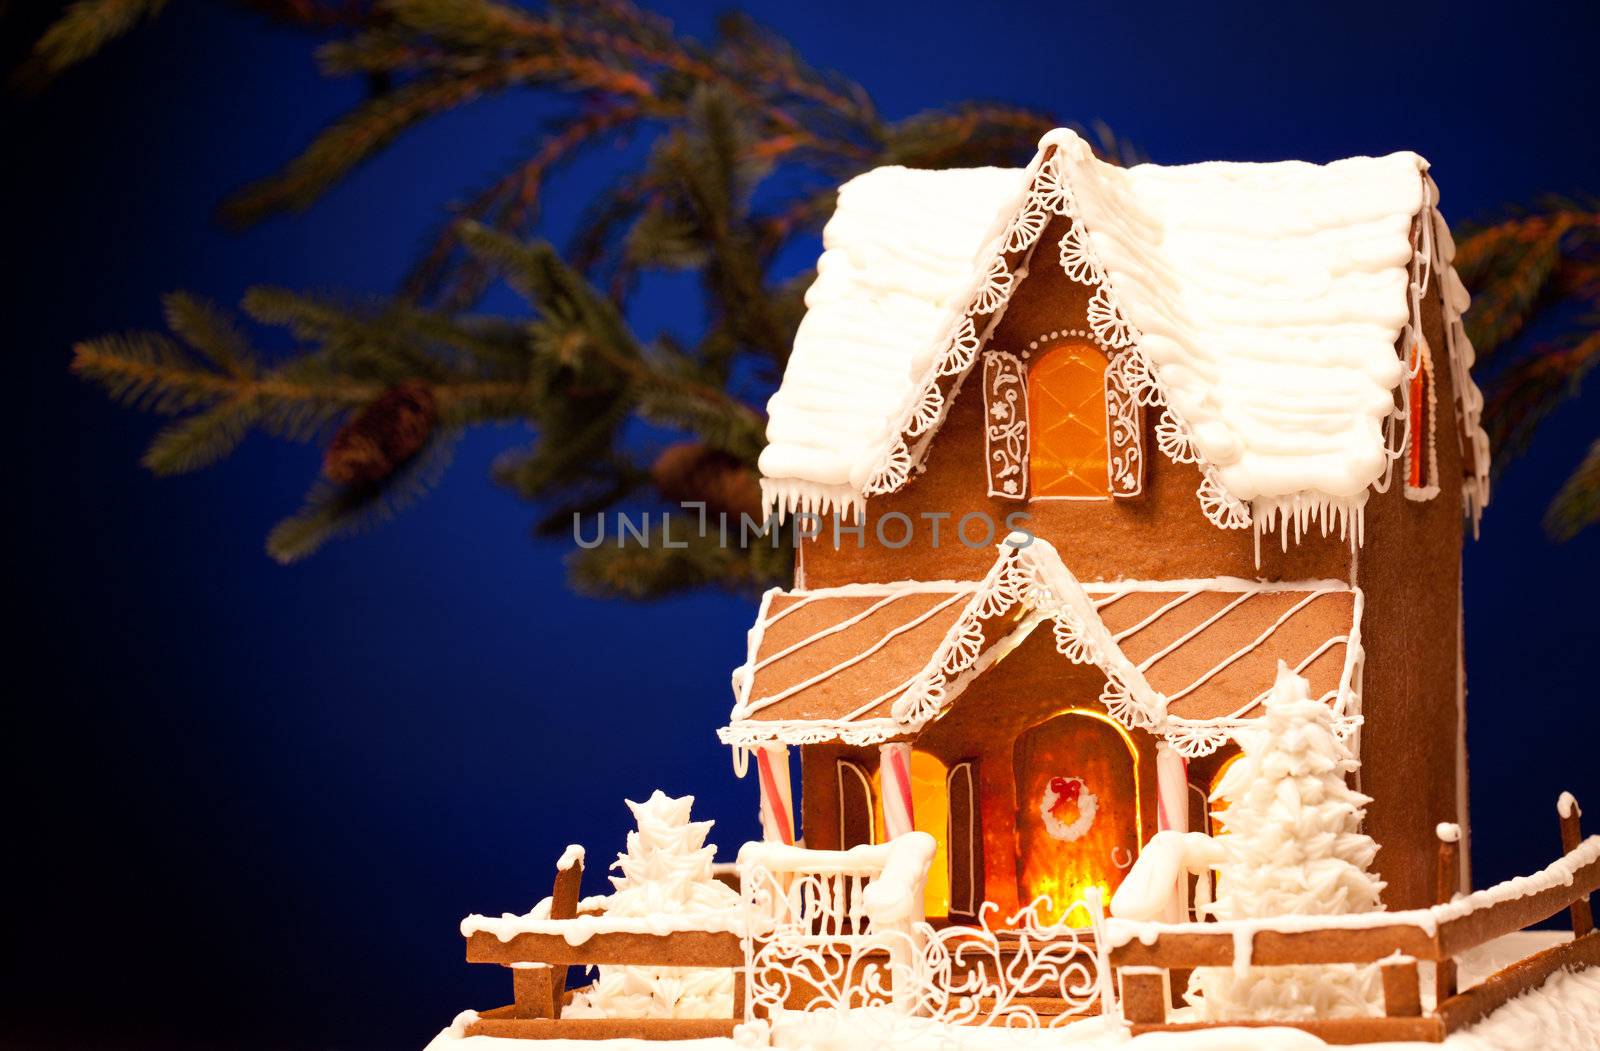 picture of gingerbread house over christmas background